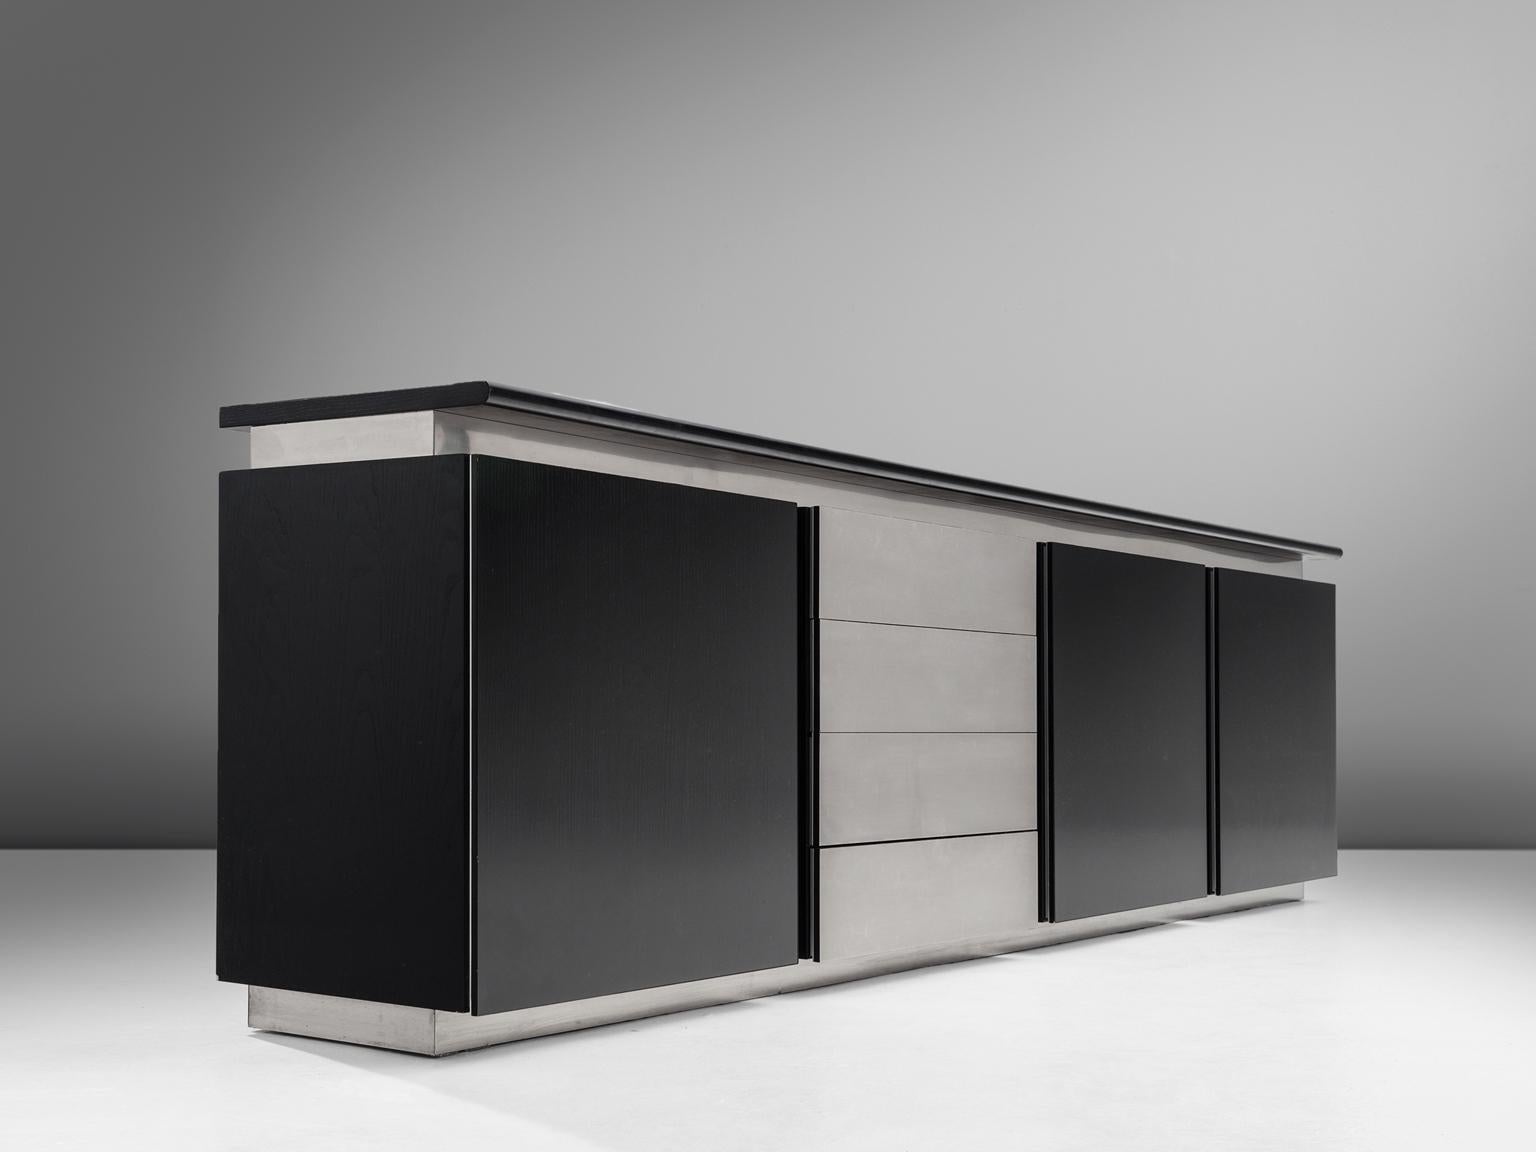 Lodovico Acerbis for Acerbis, sideboard, oak and steel, Italy, 1970s

This elegant and modern credenza in stainless steel and stained oak is designed by Lodocivo Acerbis and part of the 'Parioli System'. Within this line of design Acerbis created